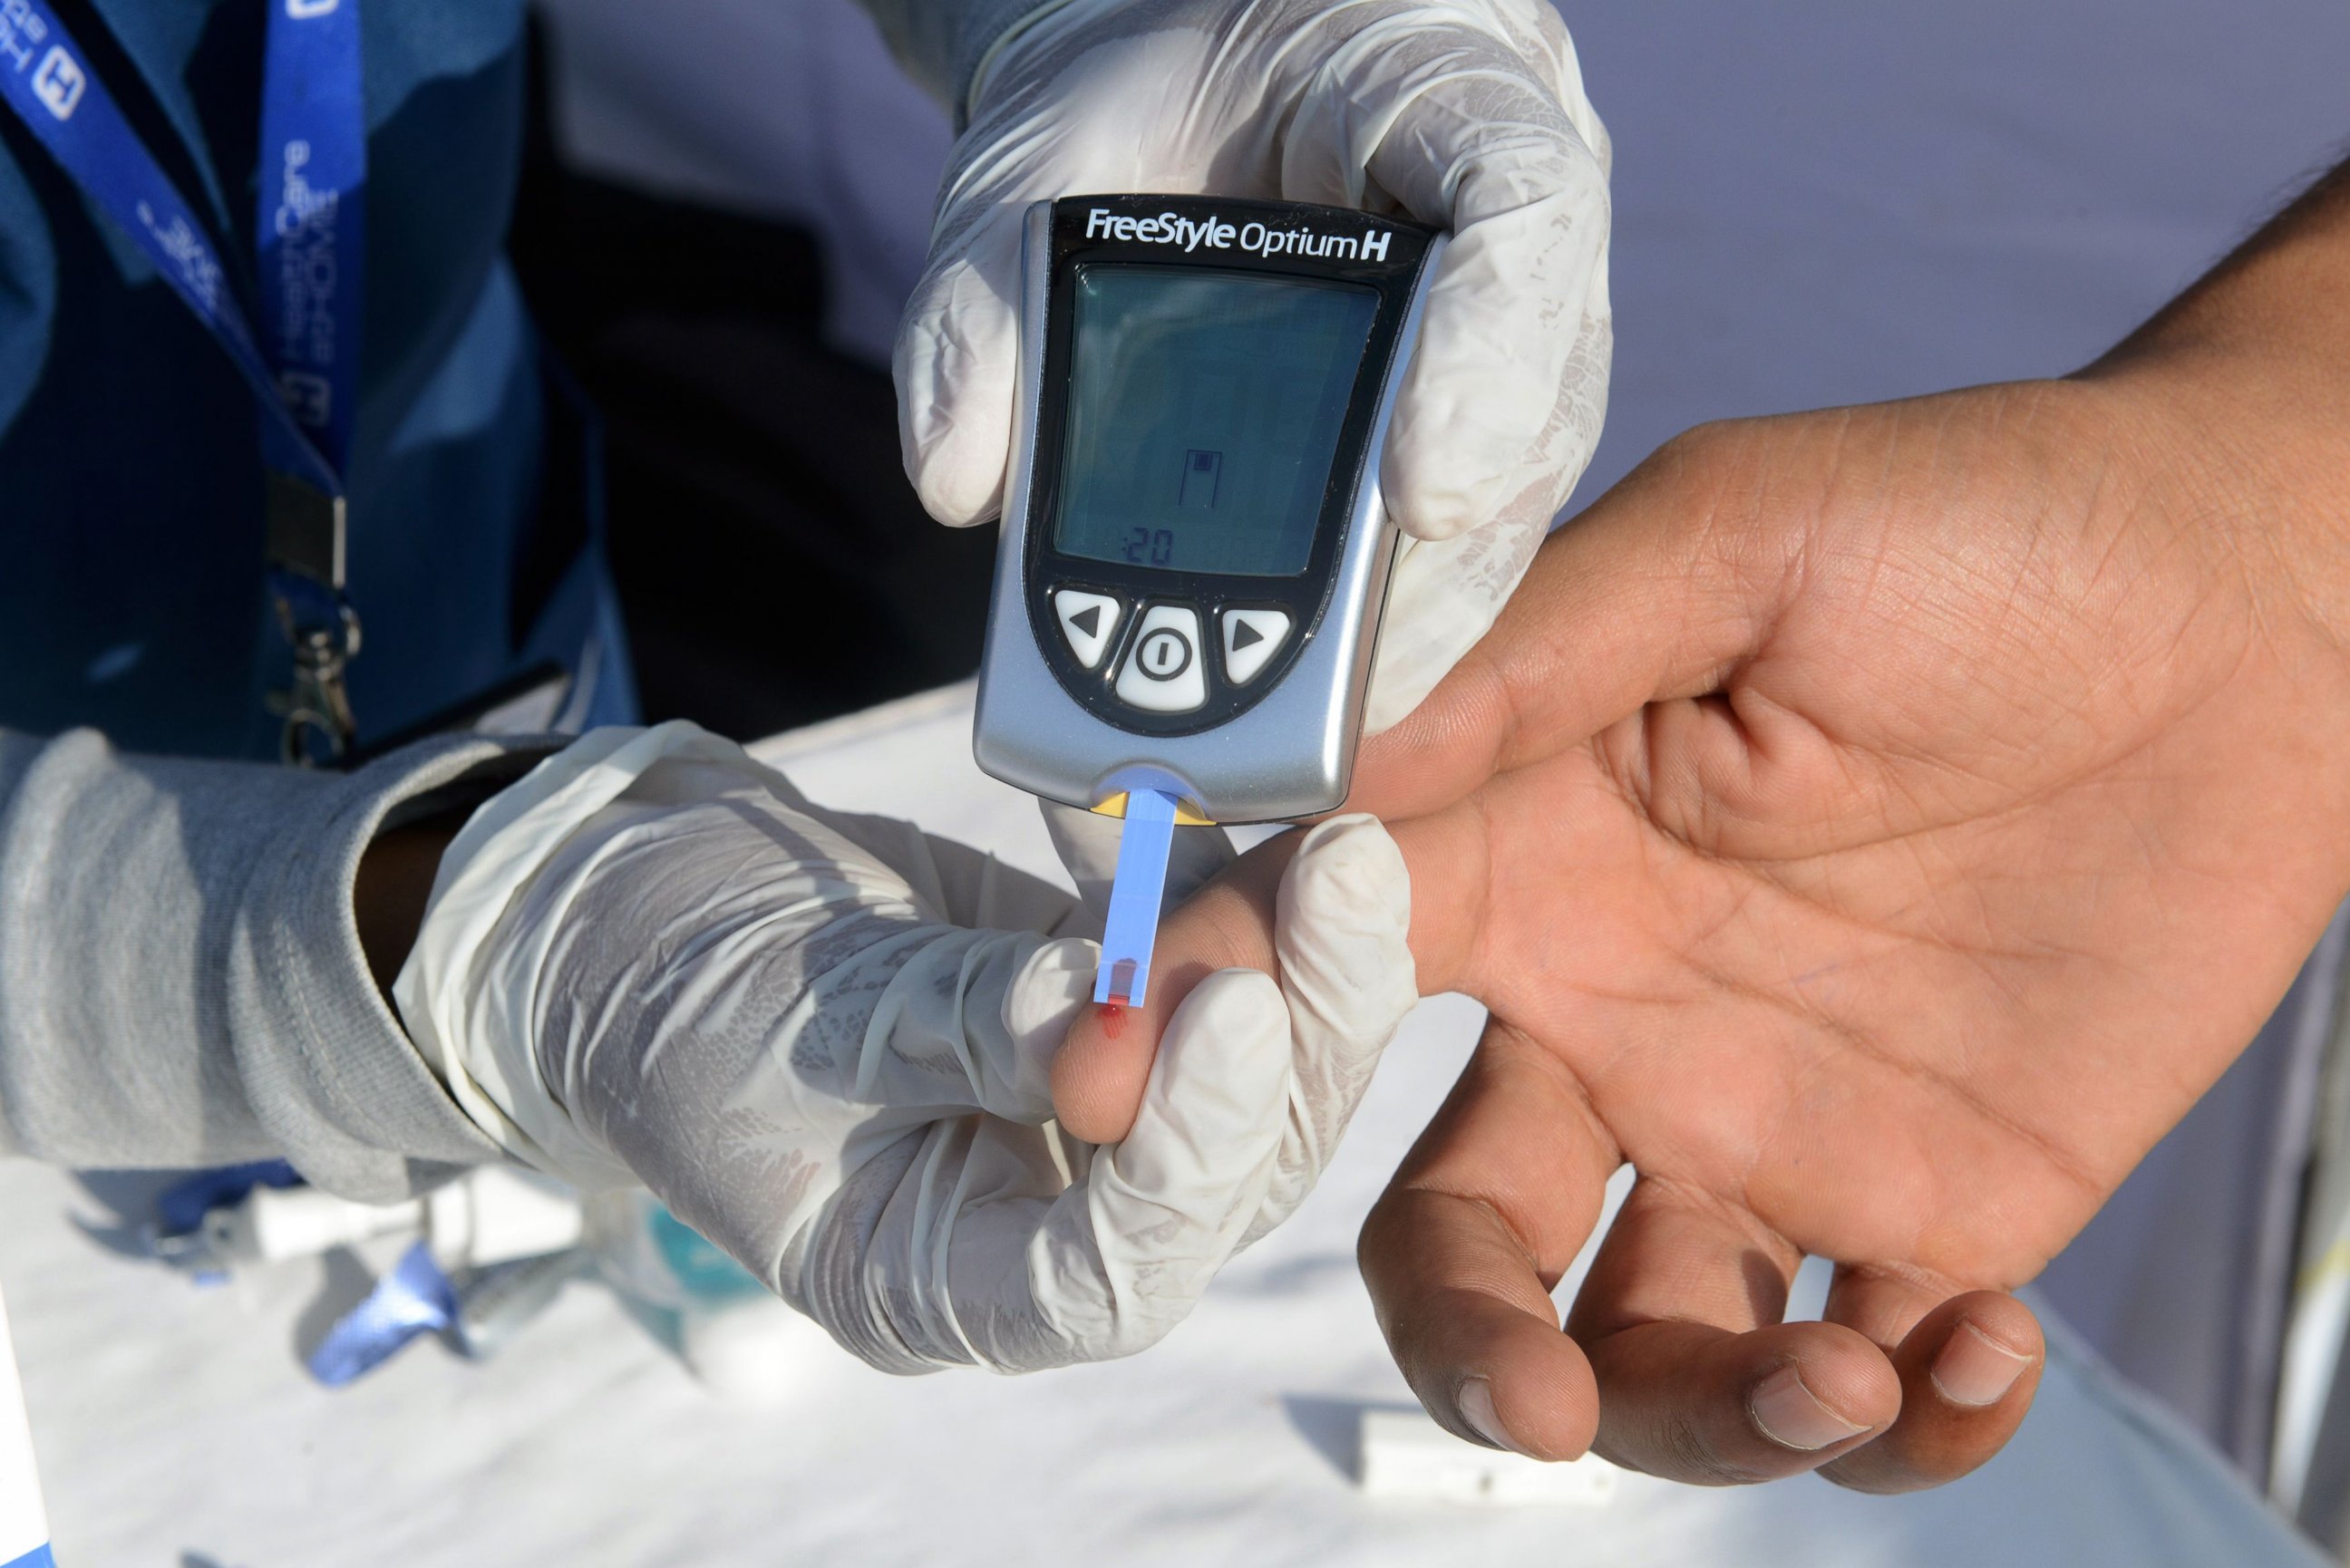 PHOTO: A nurse collects a blood sample from a policeman using a glucometer at a free diabetic health check-up camp on World Health Day in Hyderabad, India on April 7, 2016.  "Beat Diabetes" is the theme of World Health Day 2016.